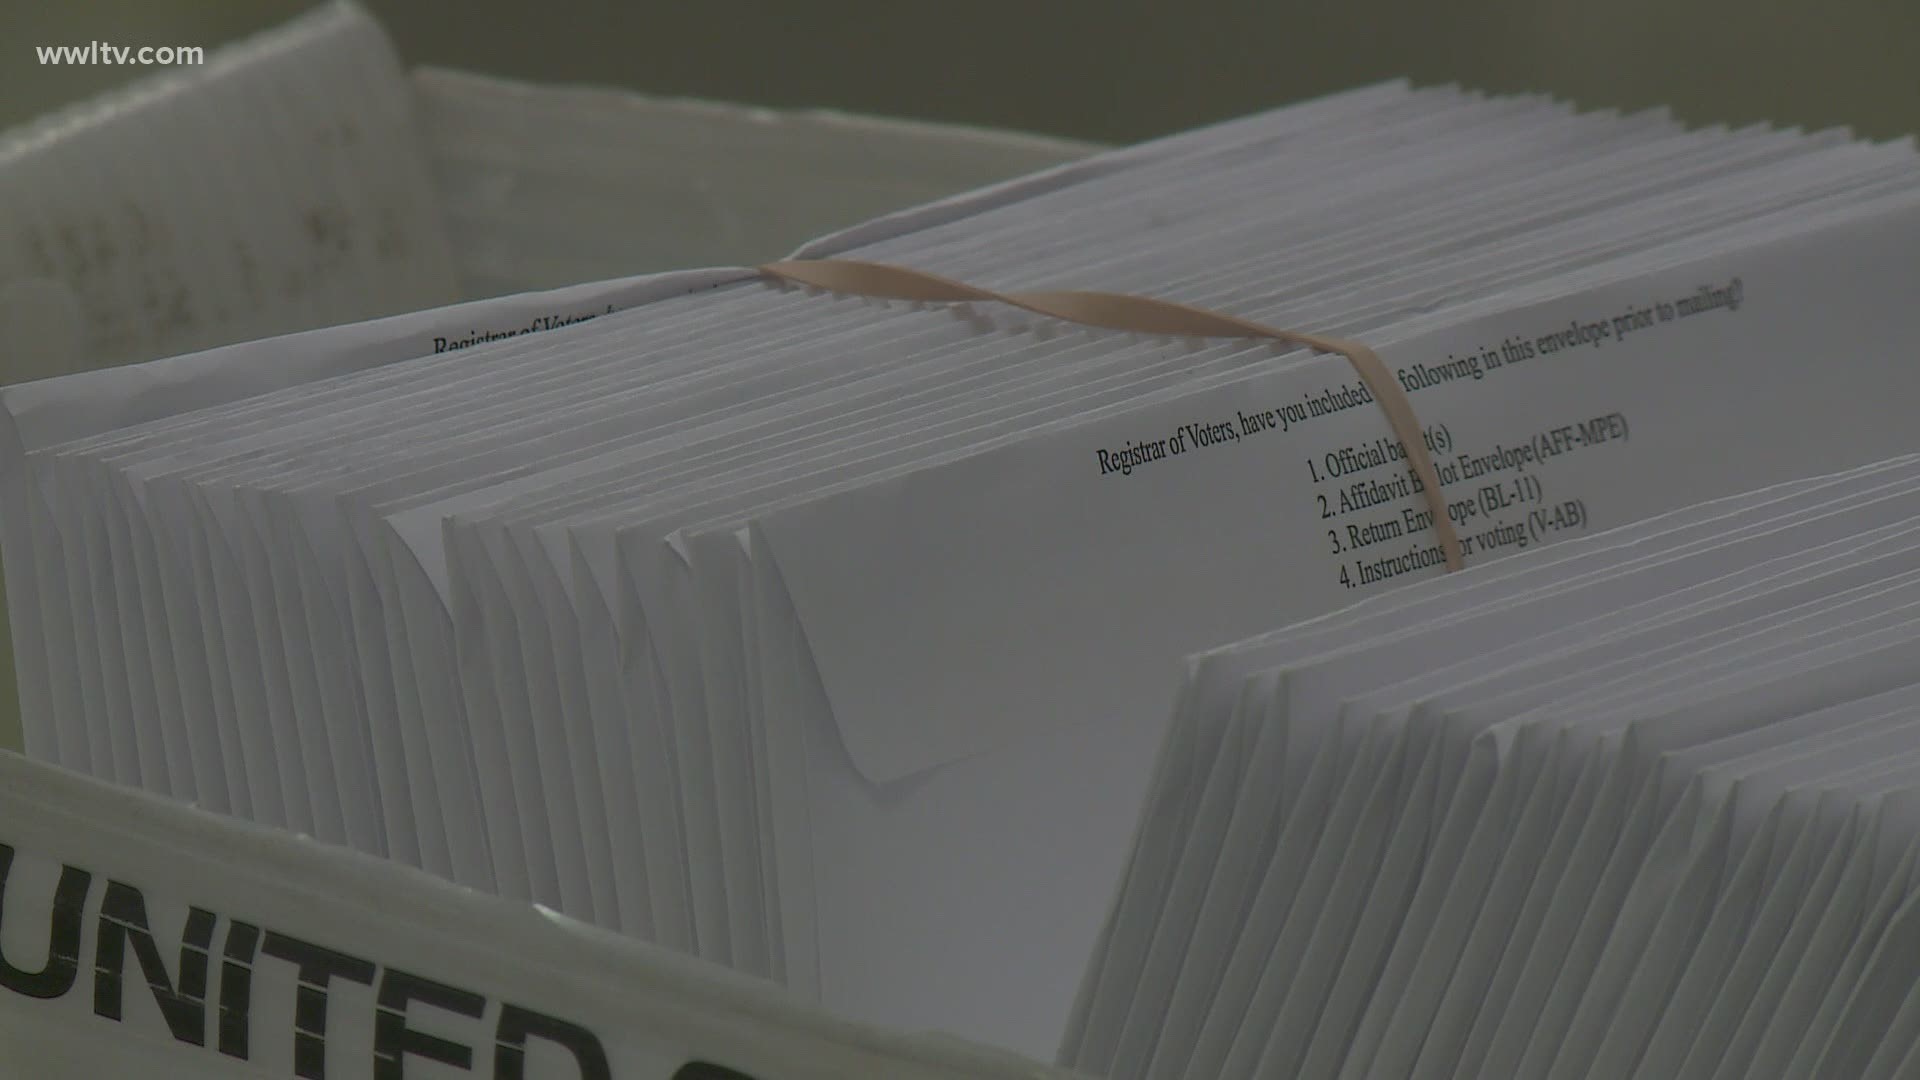 The Orleans Registrar of Voters office brought in extra help to process all the requests for absentee ballots for the November 3, presidential election.